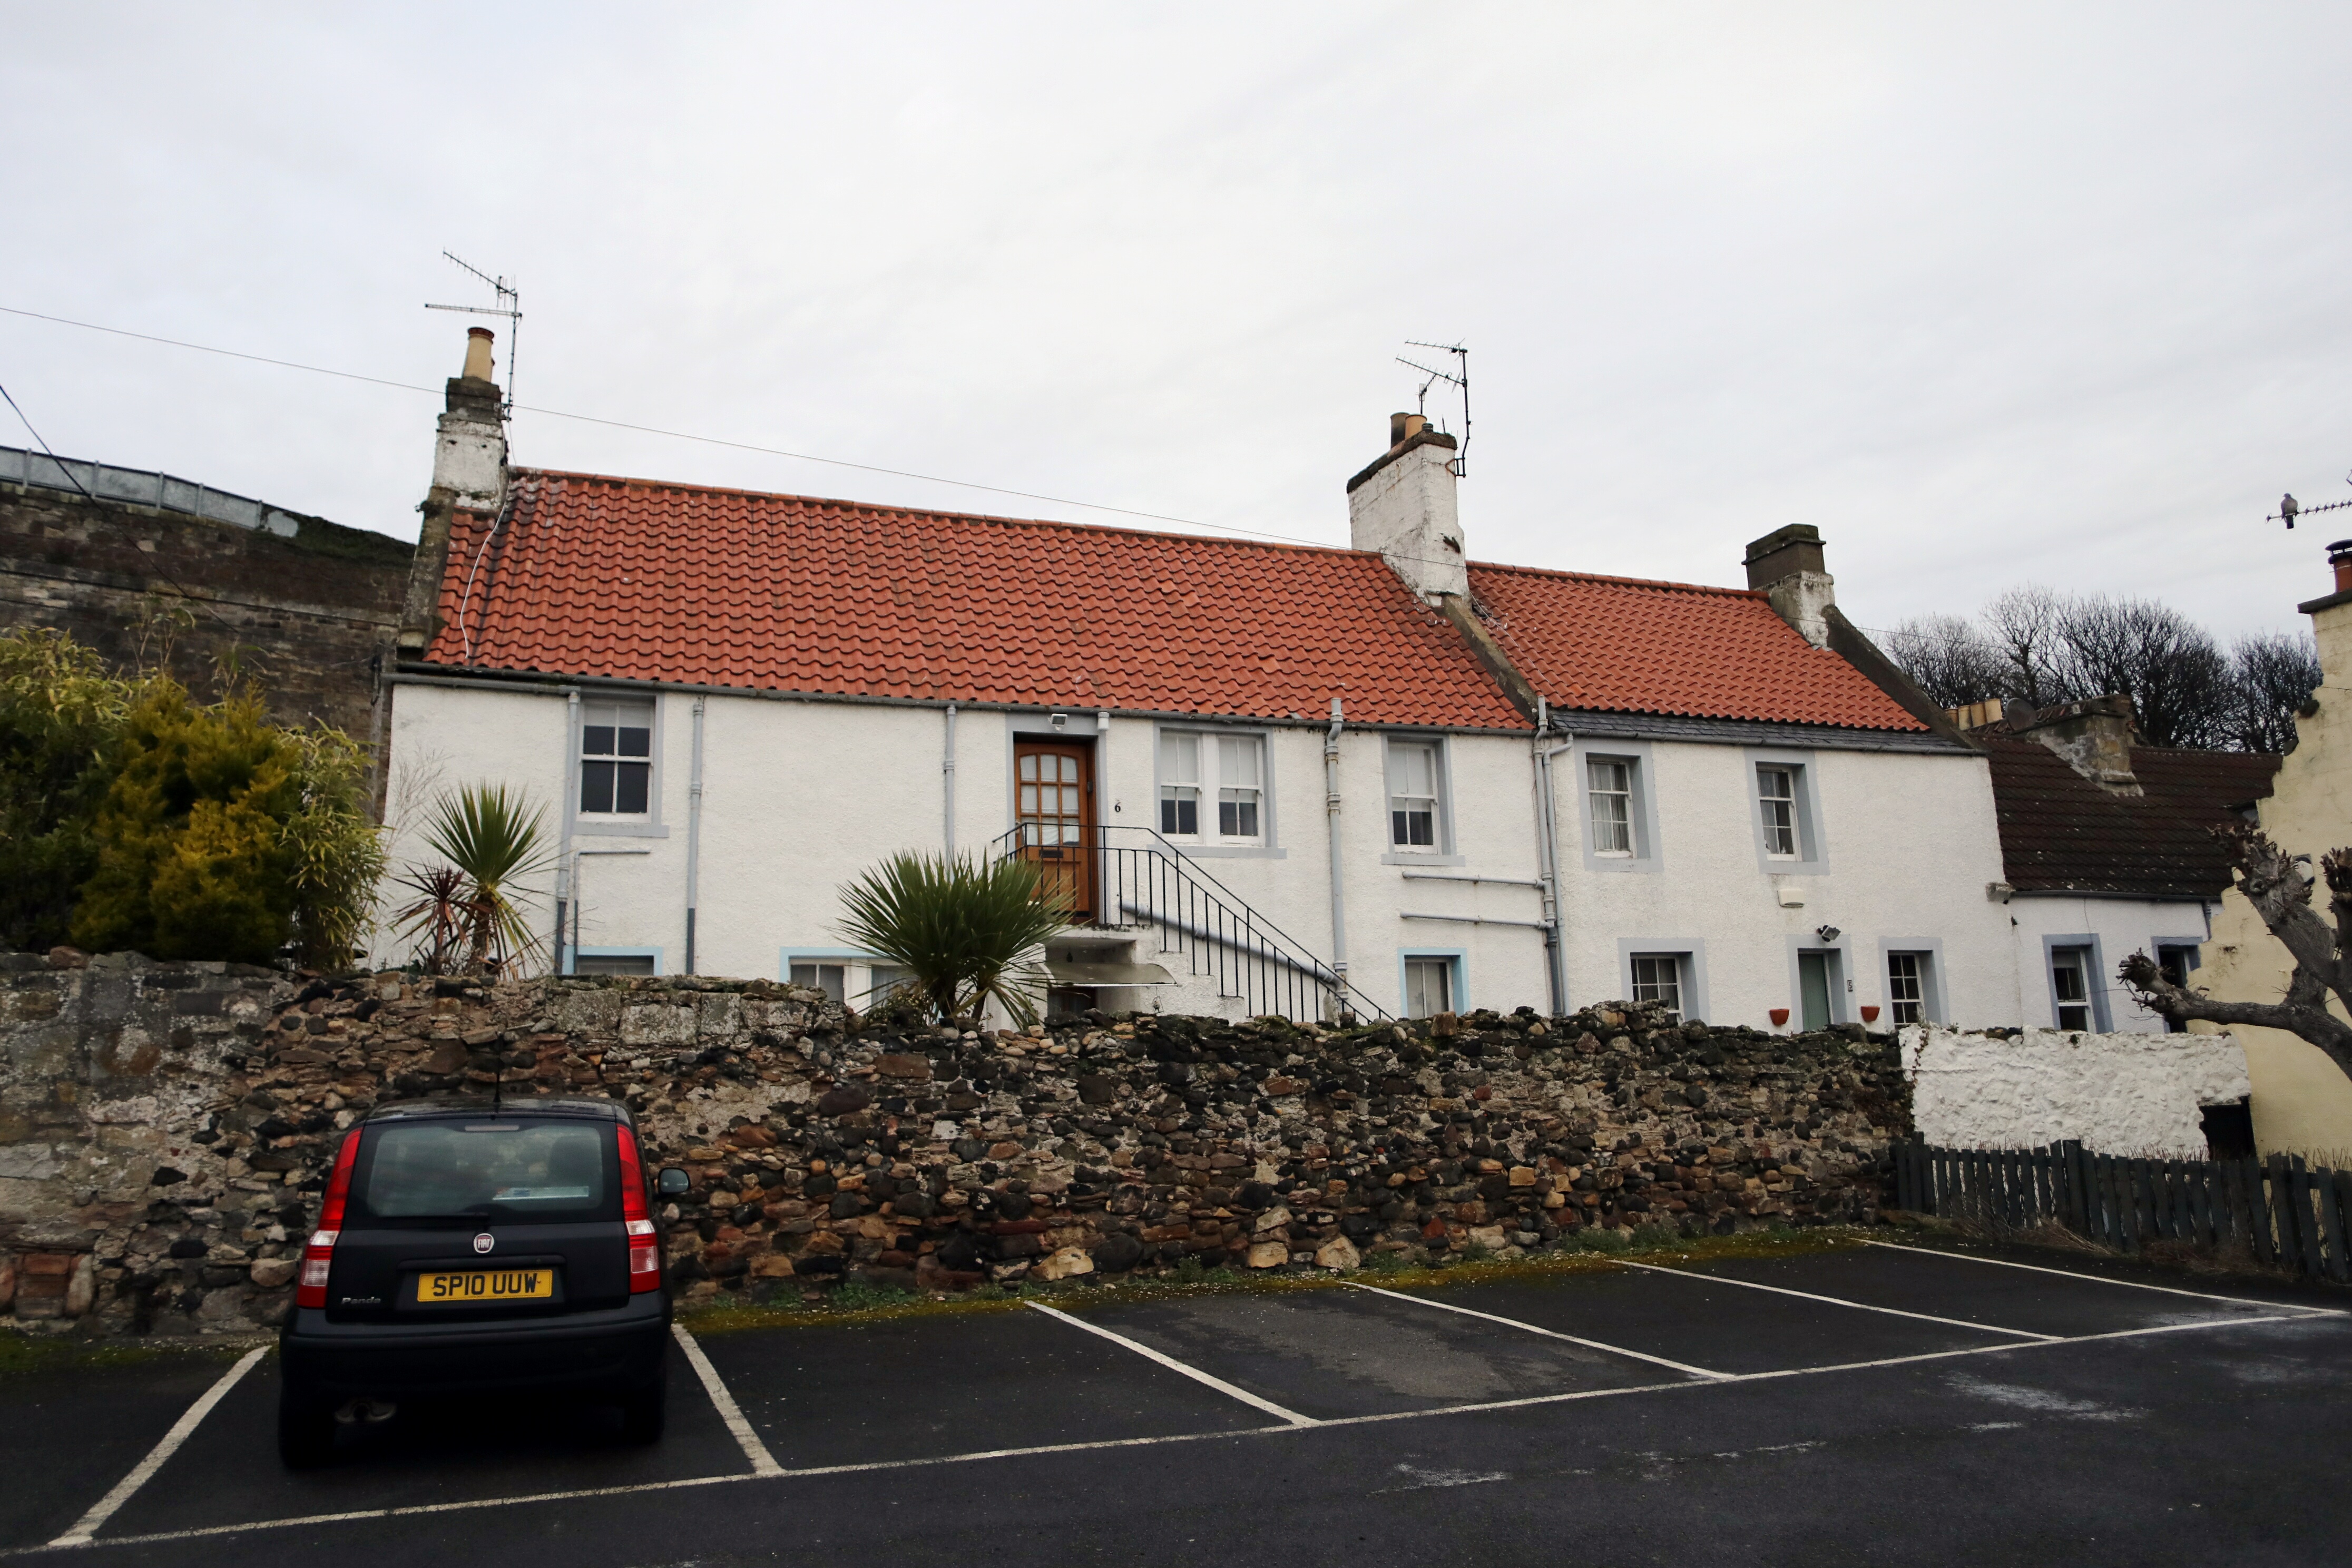 Guests flushing the toilet in Kinghorn holiday home keep neighbours awake